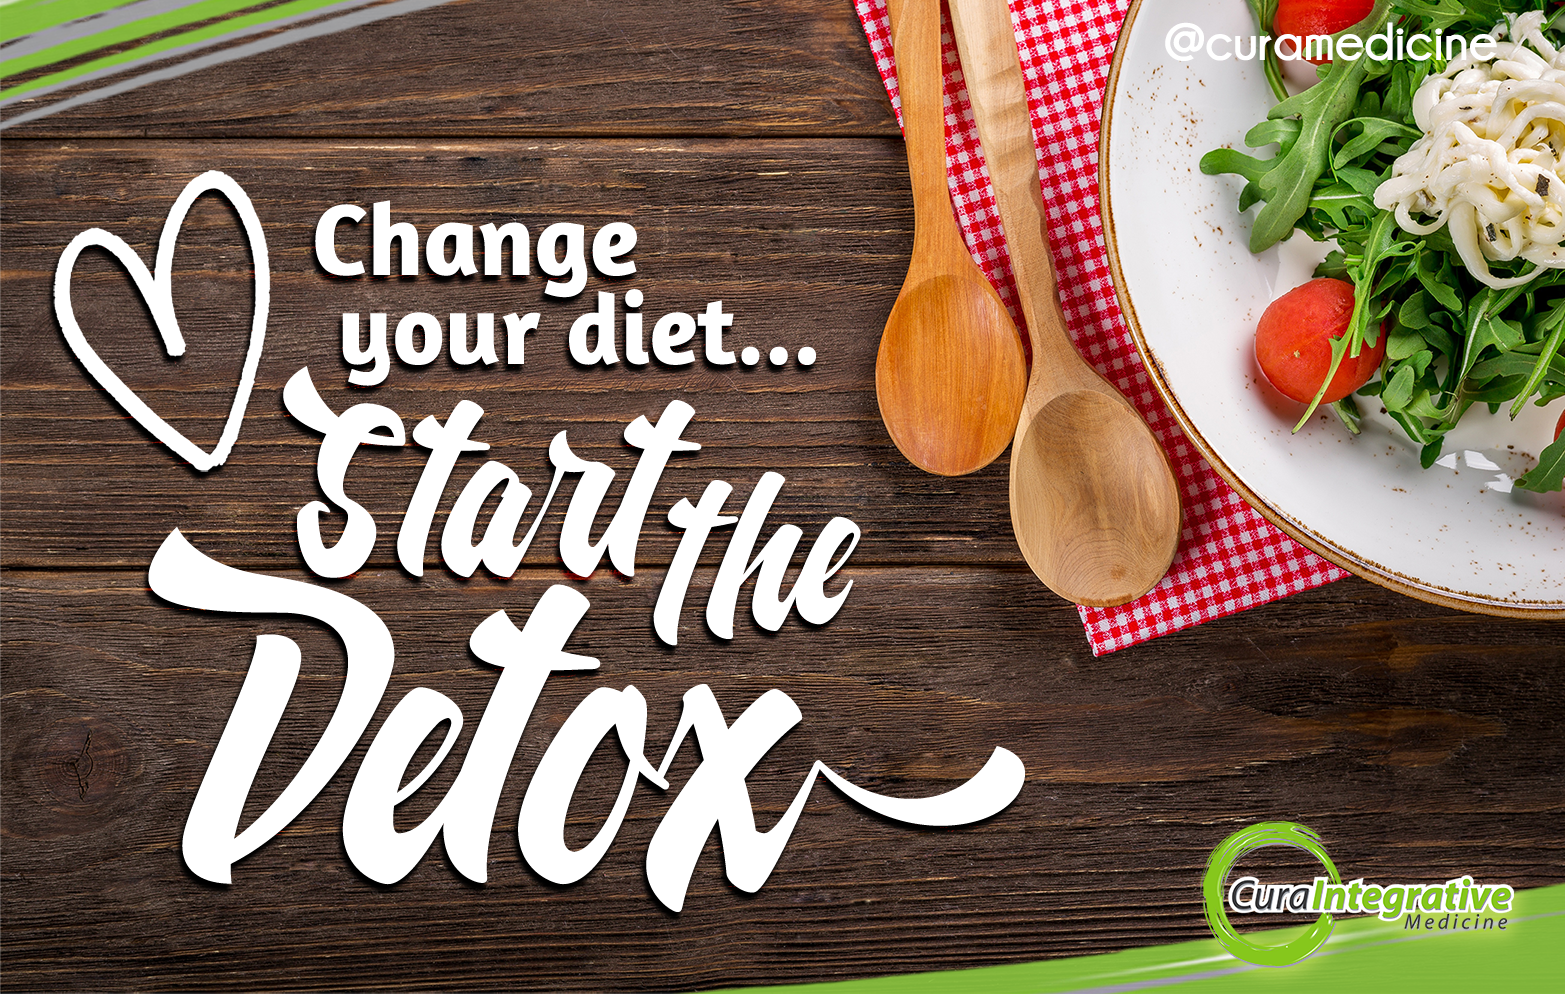 It's time to start the detox and change your diet